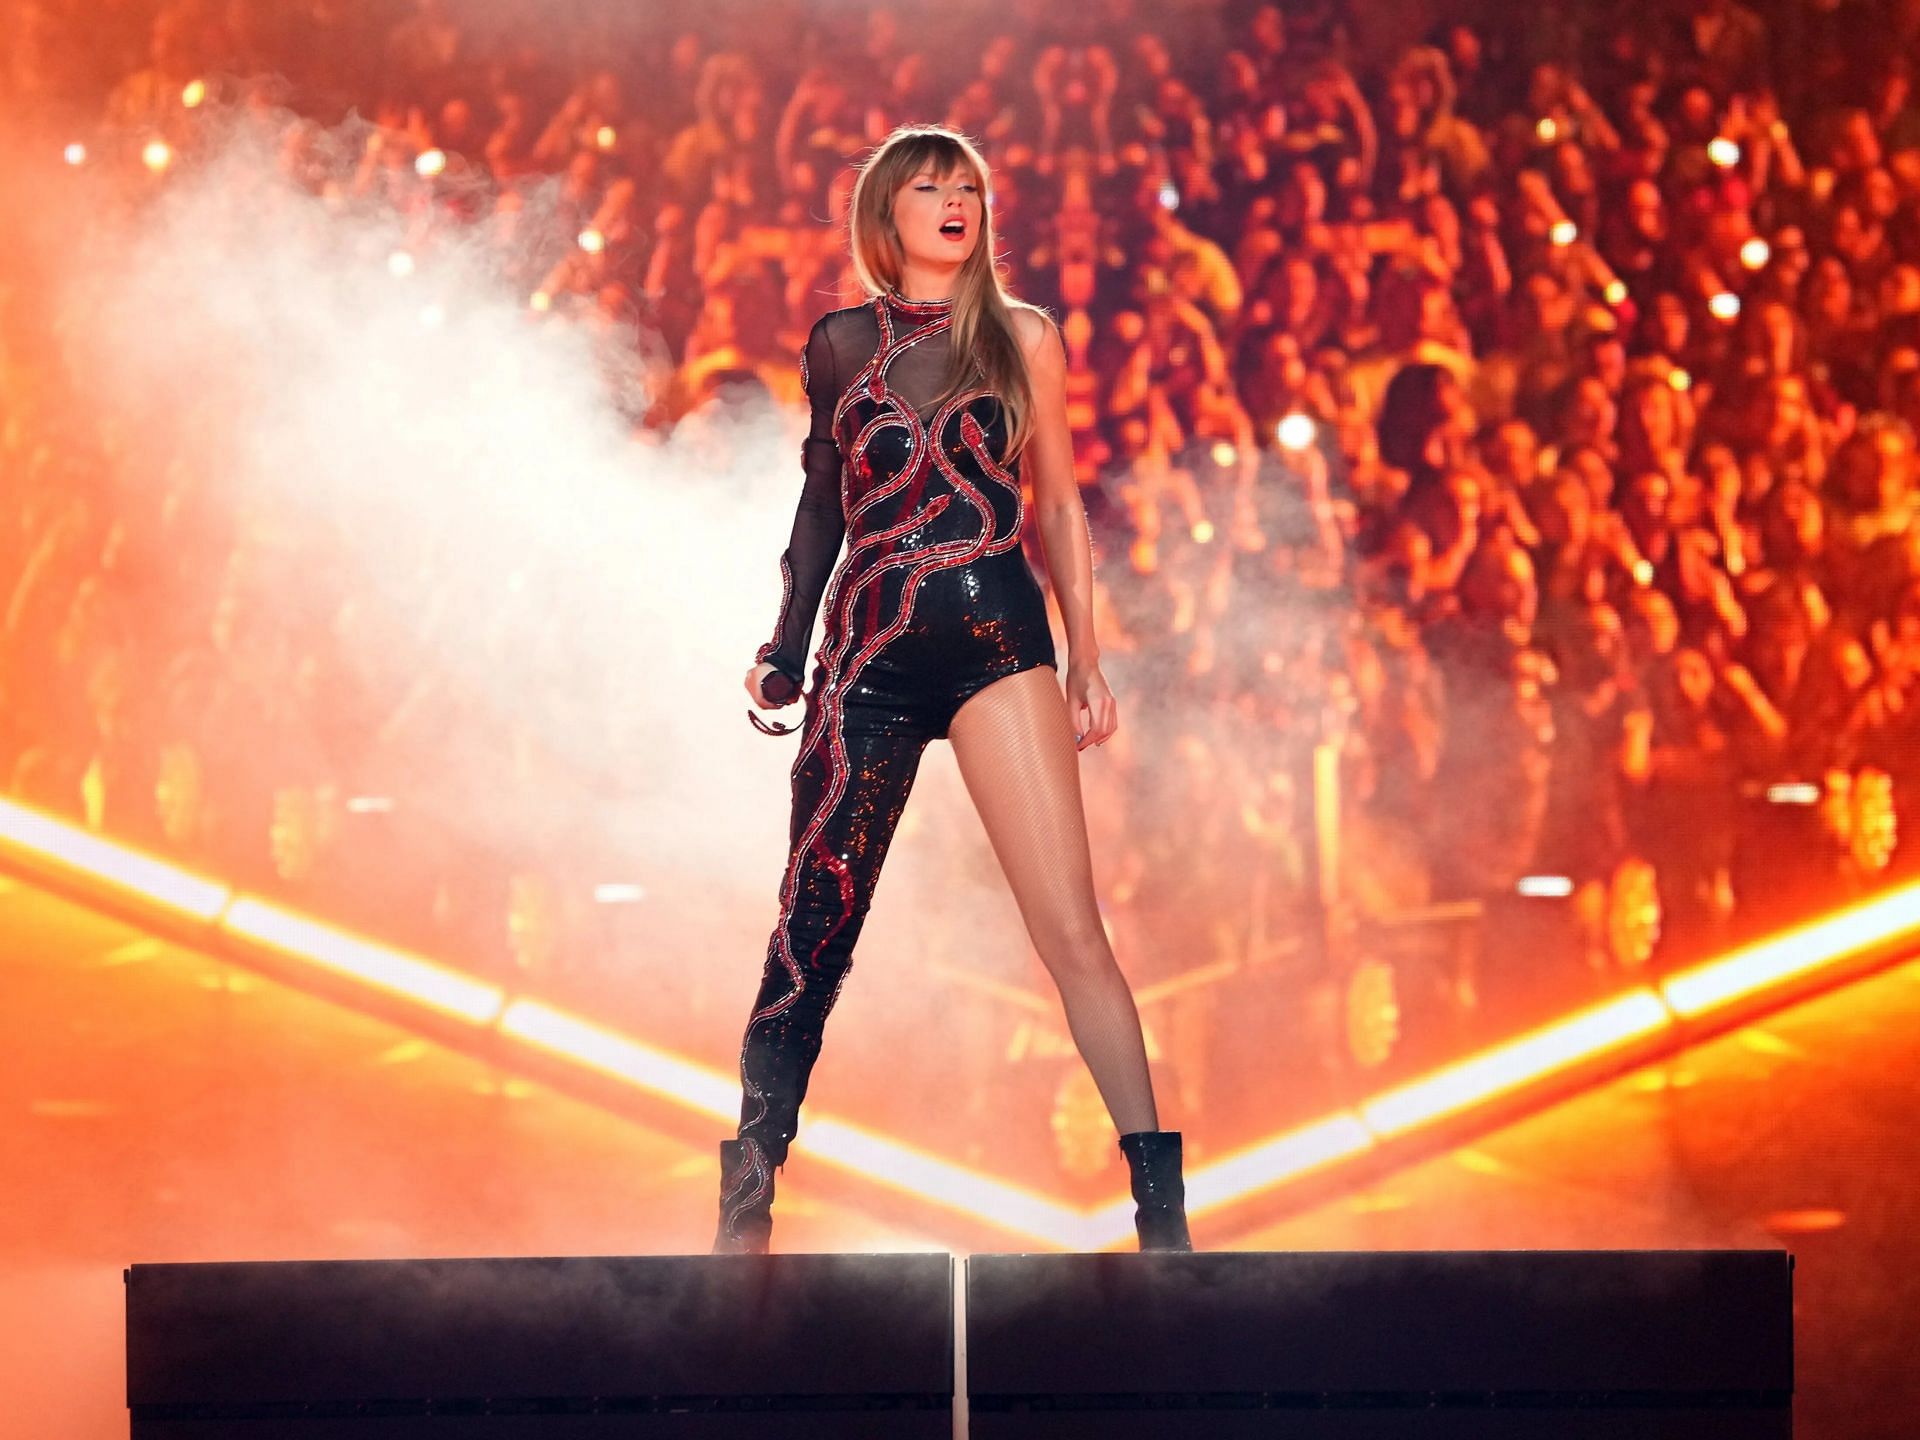 Taylor Swift is setting records at NFL stadiums